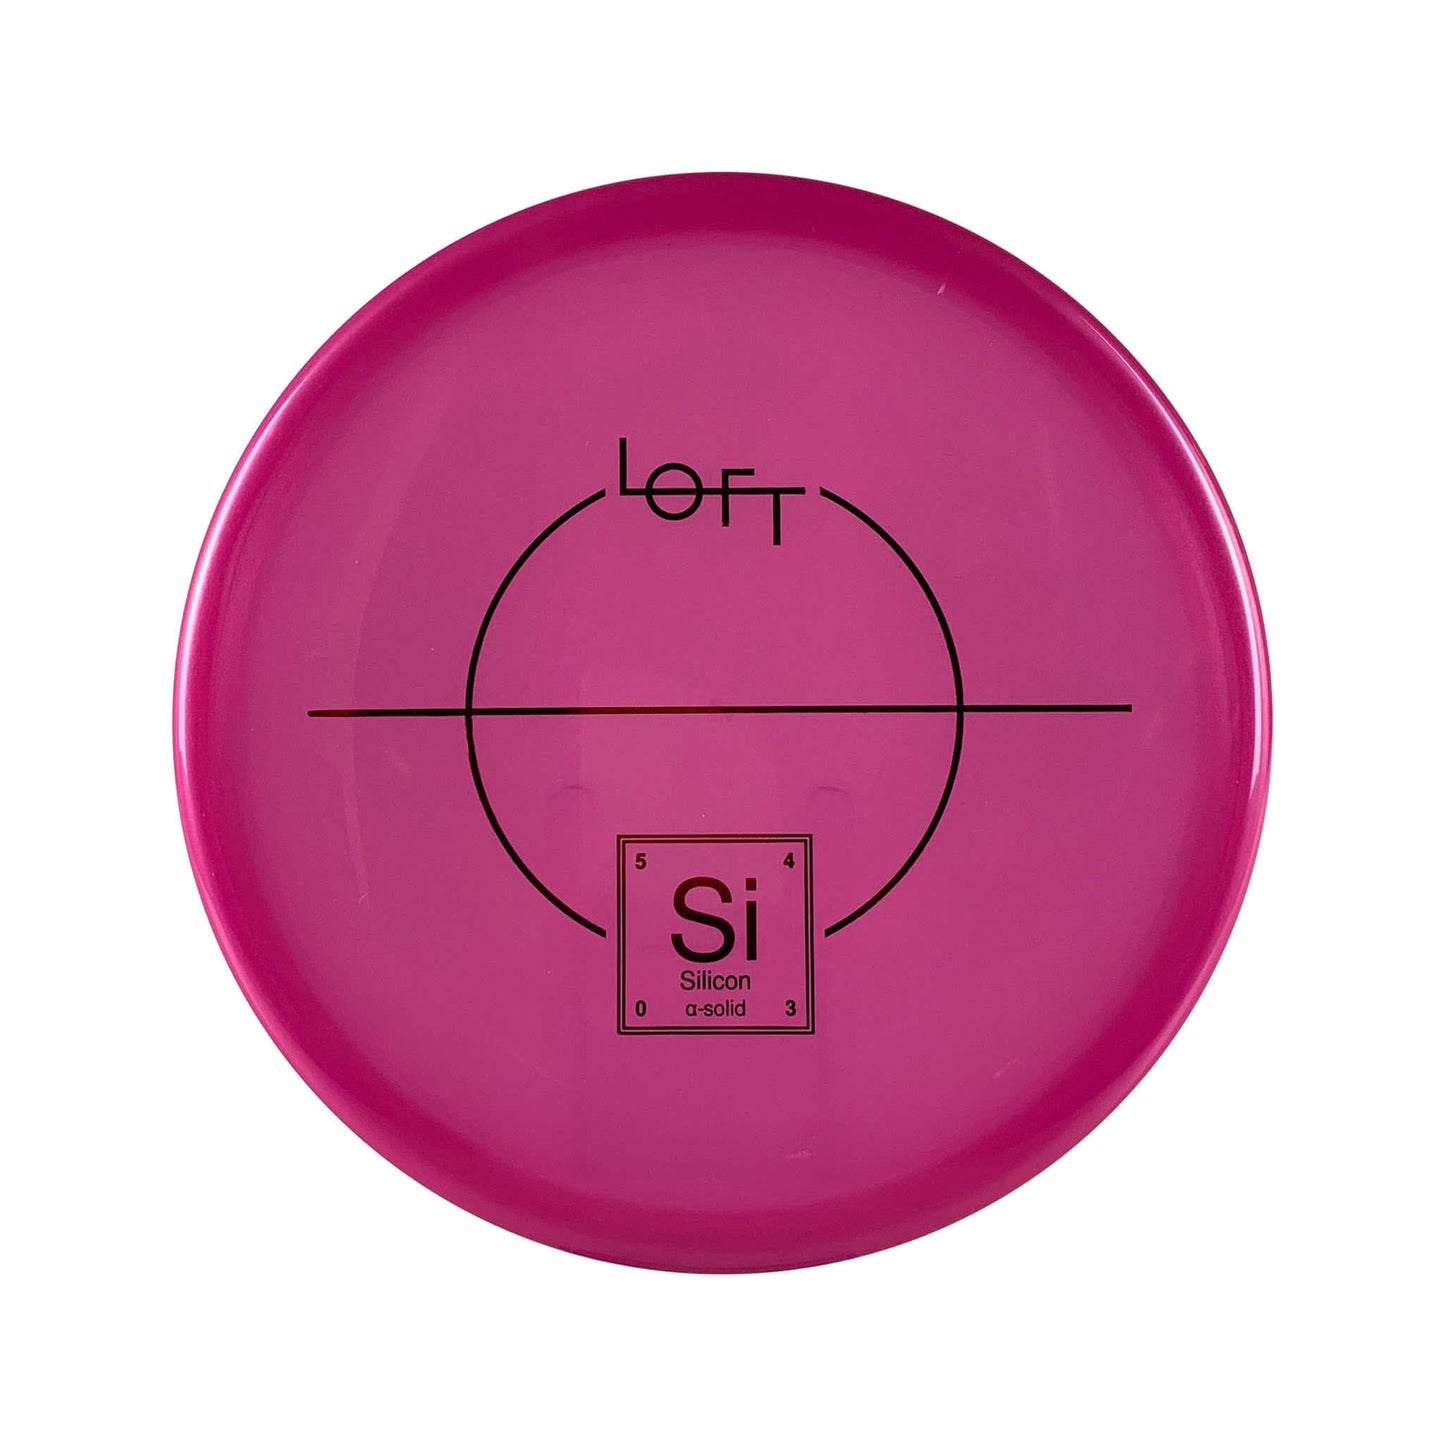 A-Solid Silicon Disc Loft pink 181 